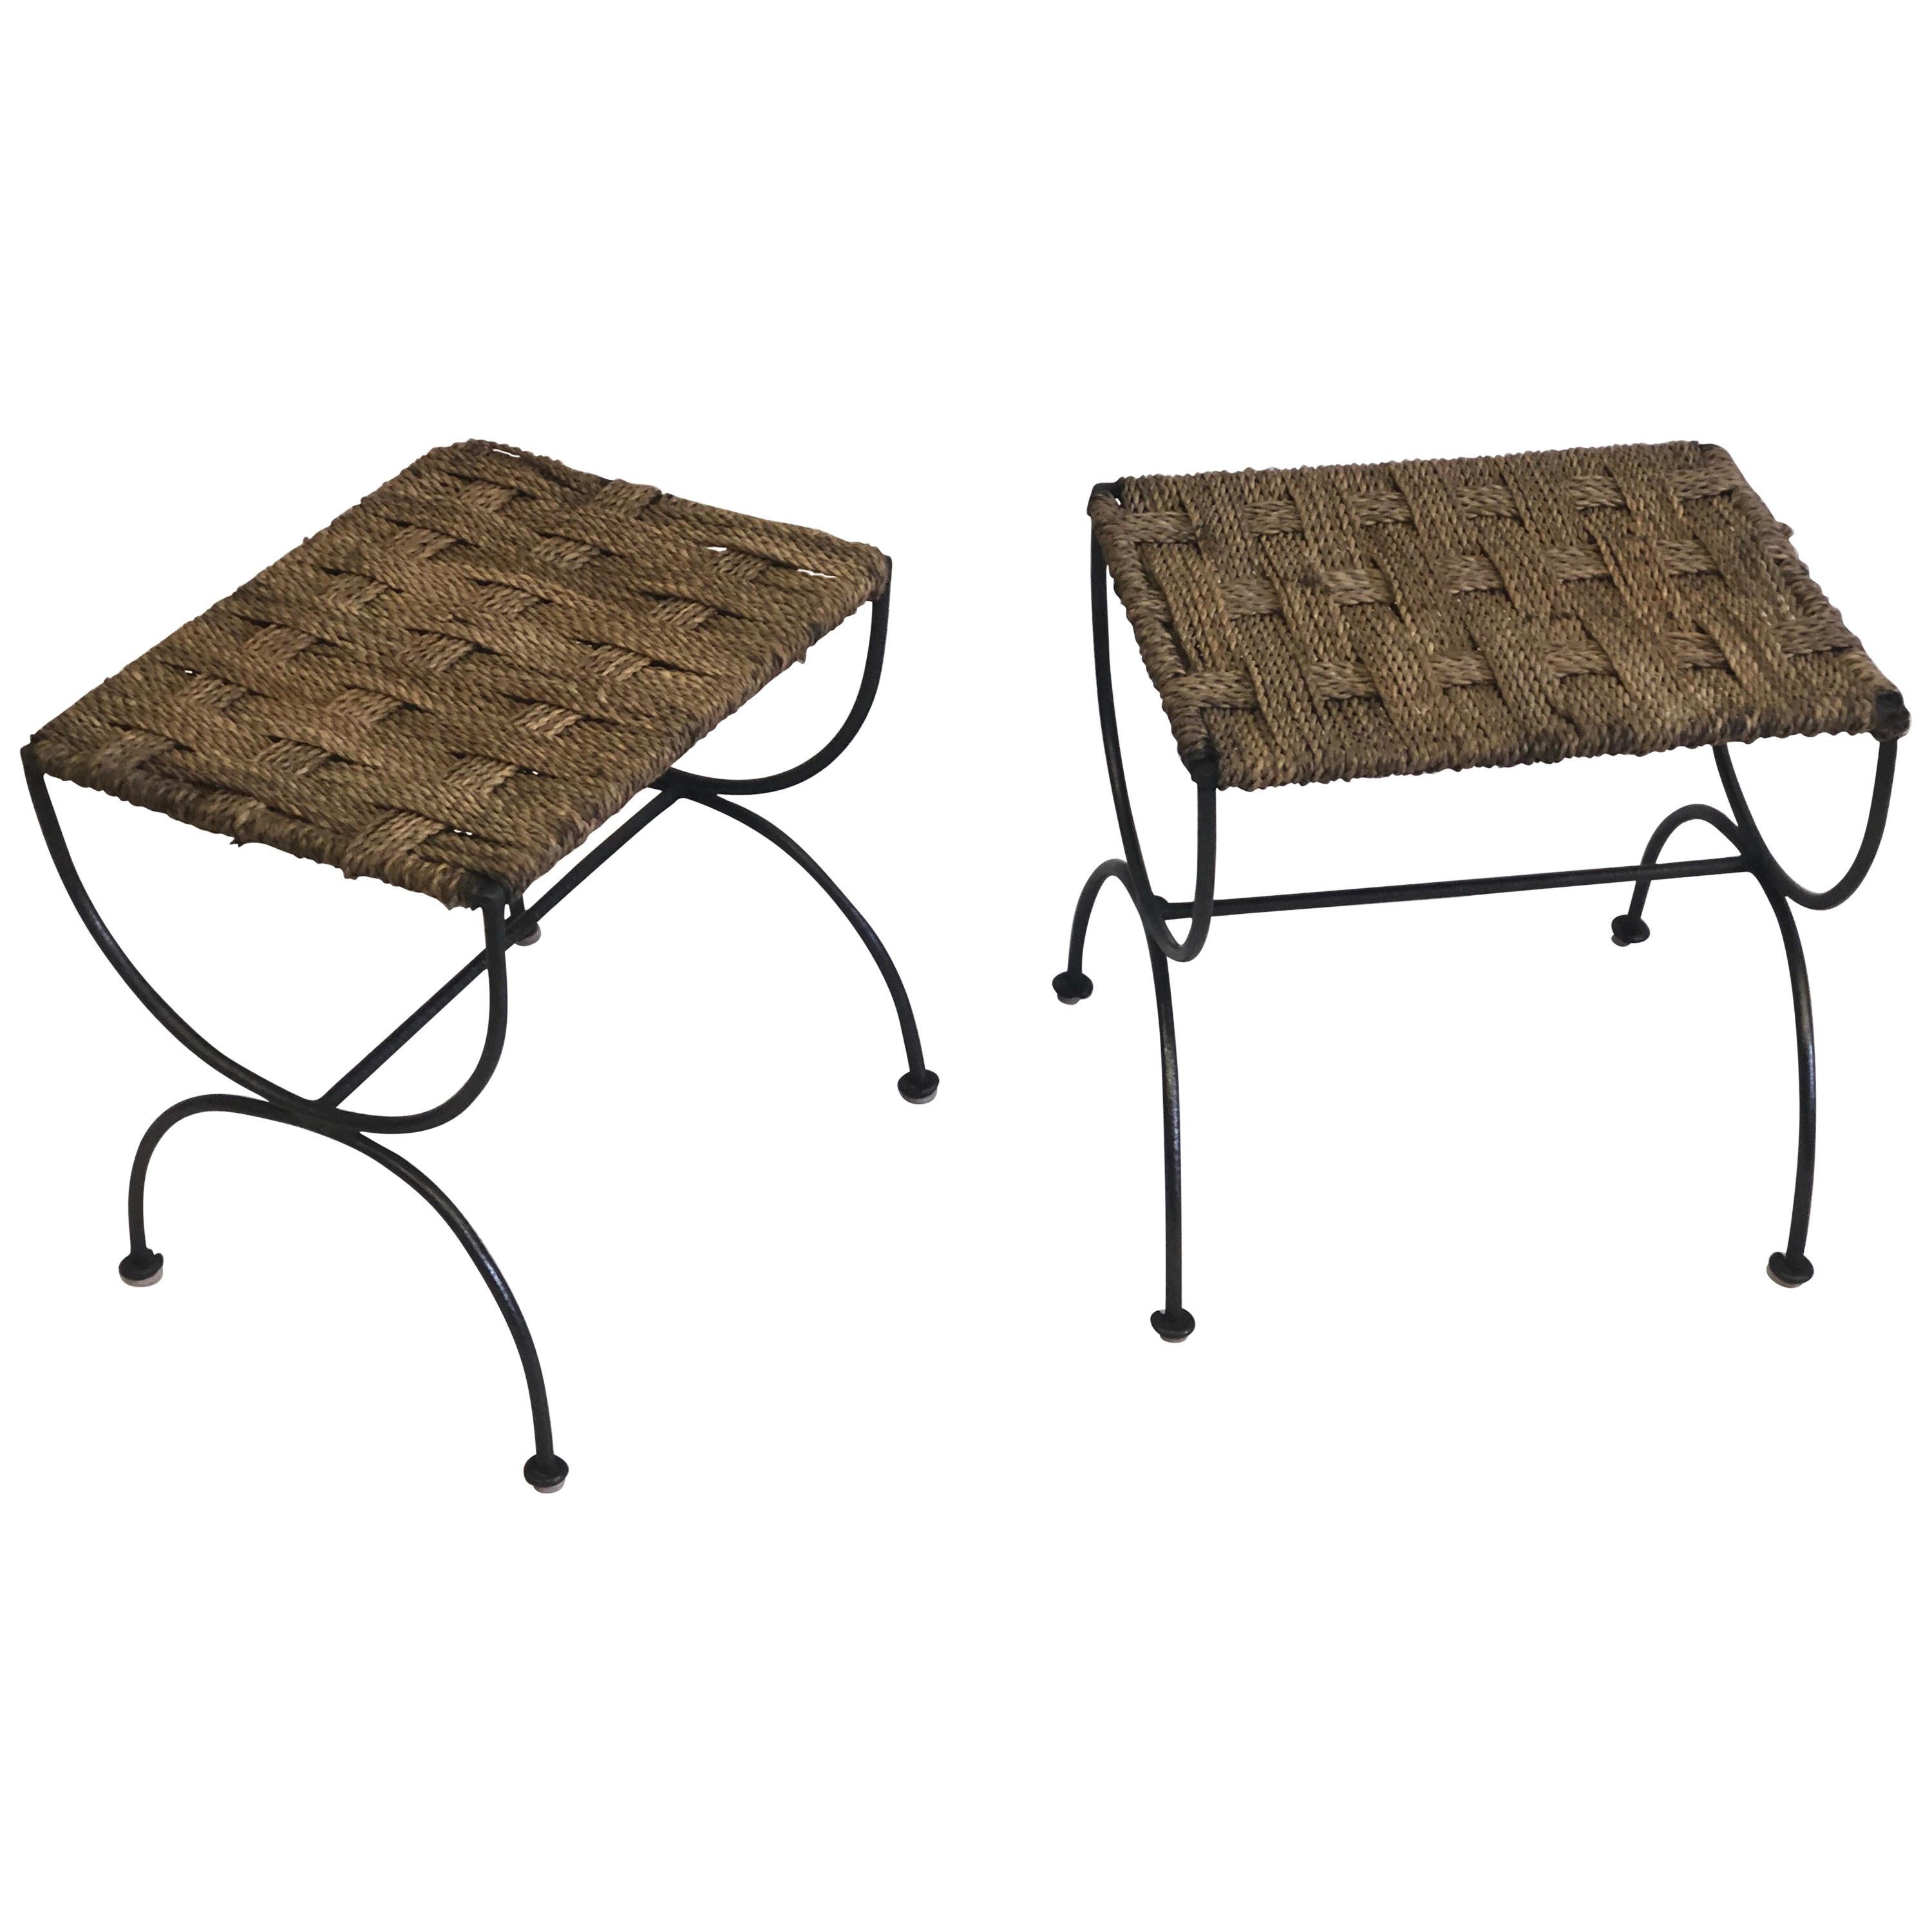 Pair of French Mid-Century Wrought Iron & Rope Stools / Benches, Audoux & Minet. For Sale